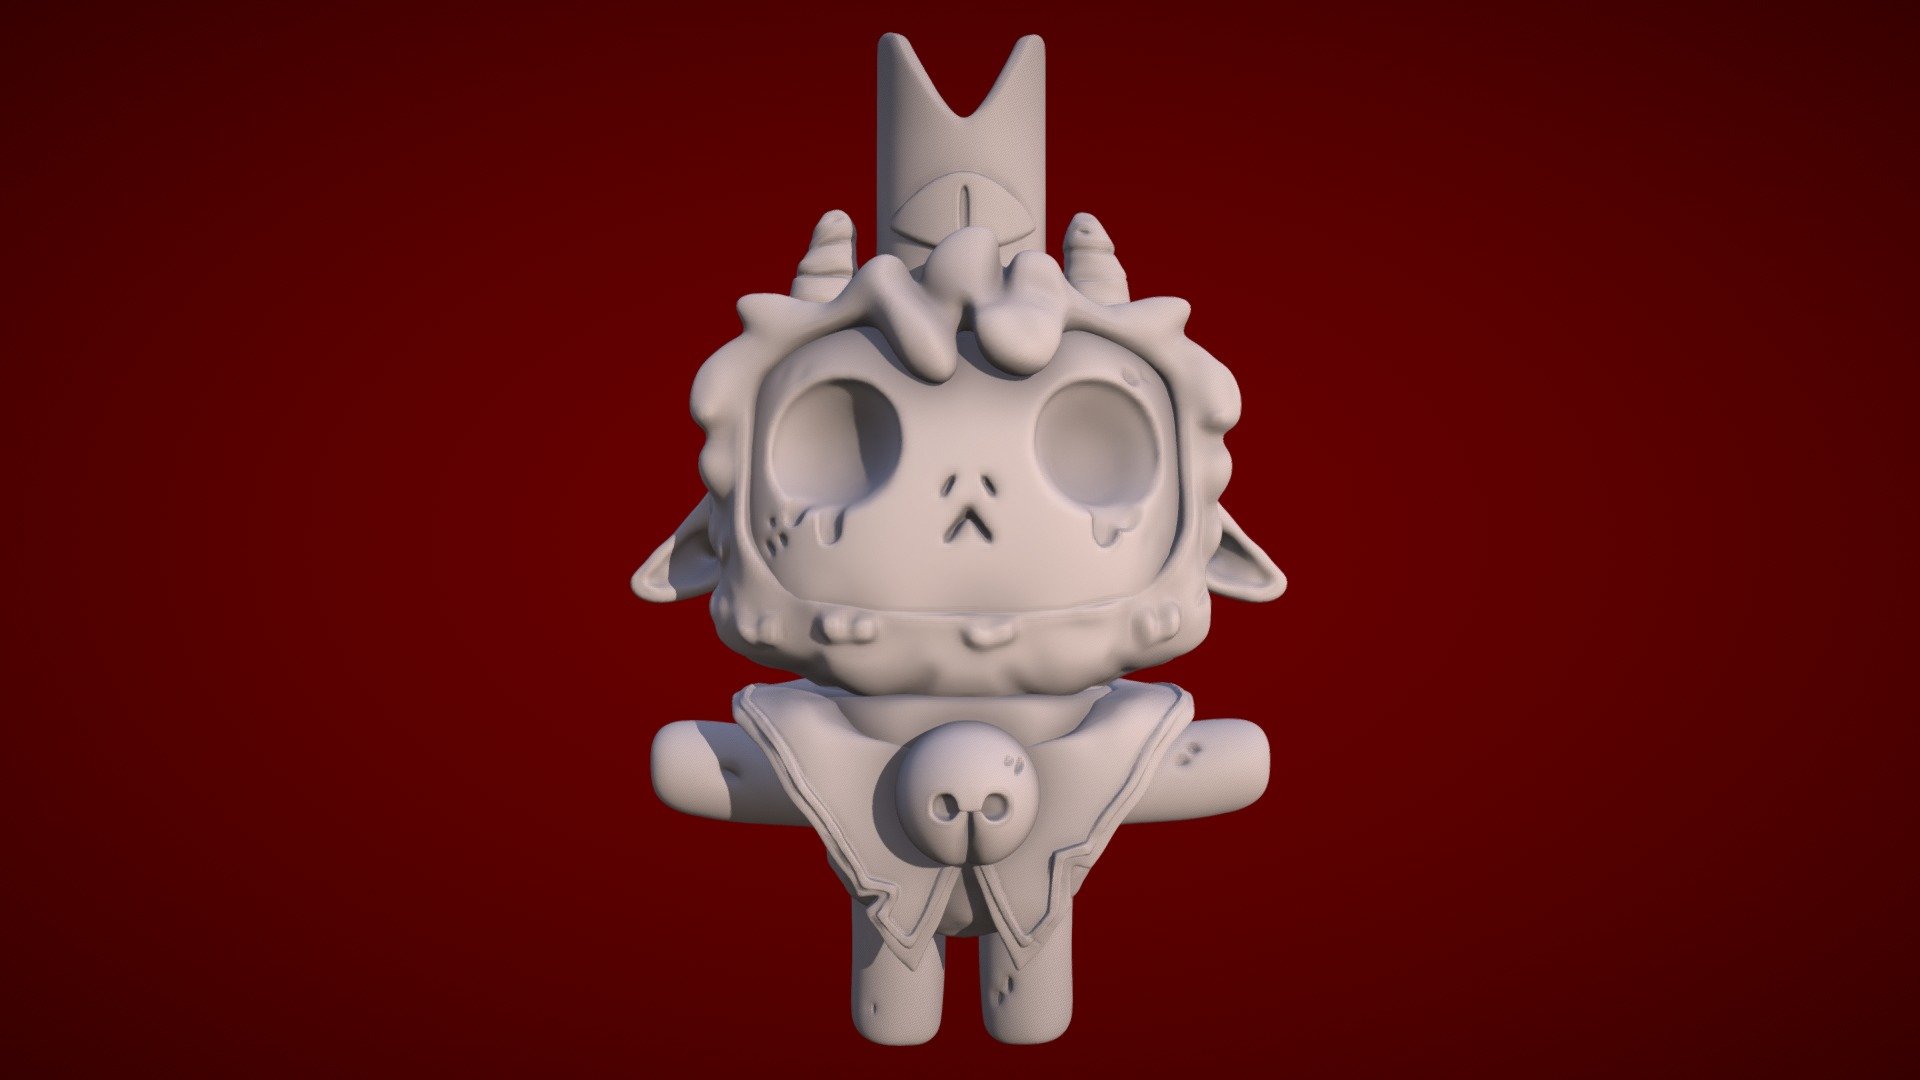 Figurine of The cult of the lamb, an indie video game from Massive Monster. 3D printable 3d model